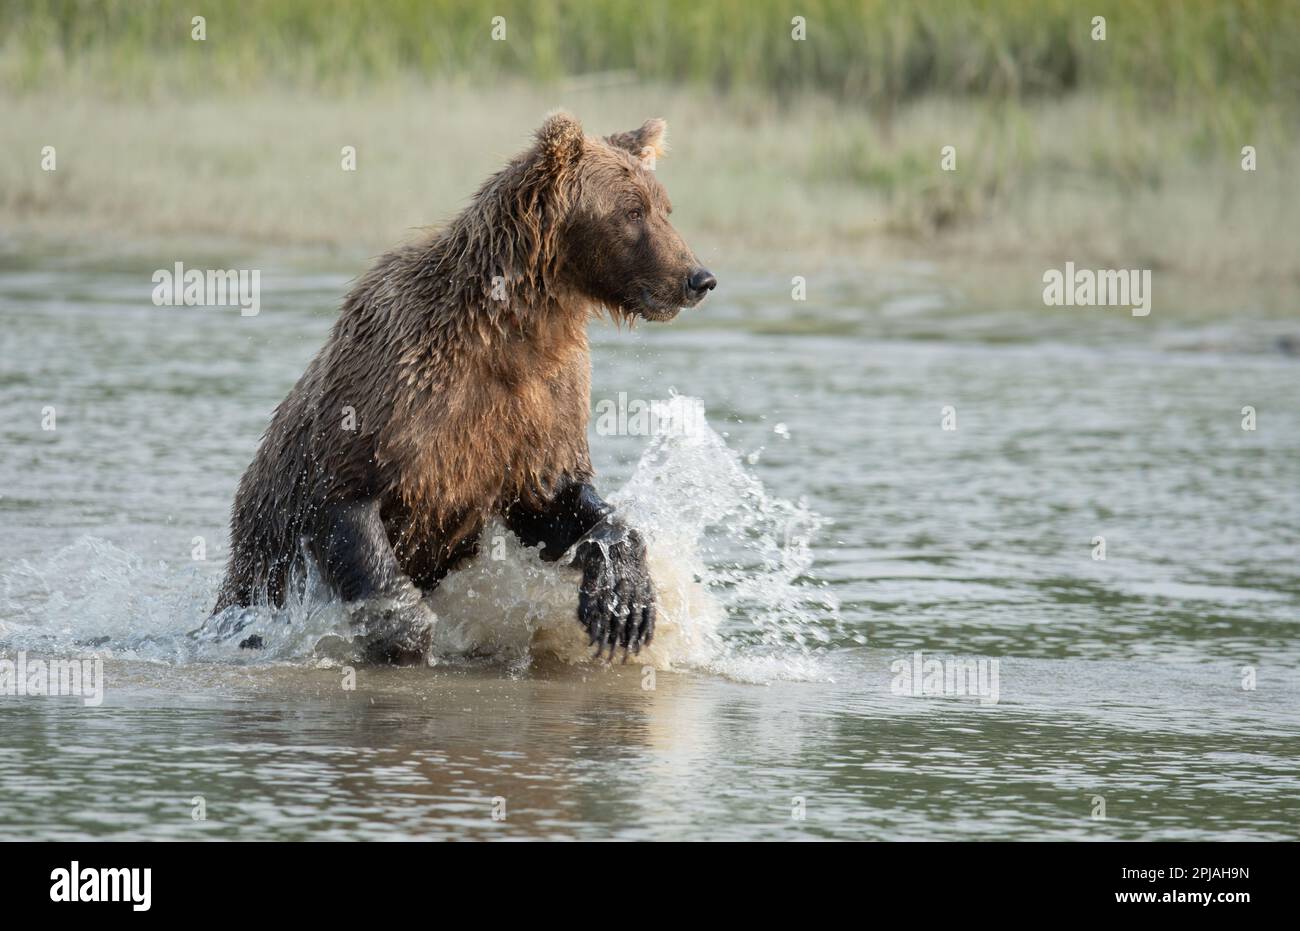 Brown bear running though the water in search of a meal during the salmon spawn in August in Alaska.  Lots of splashing water and energy. Stock Photo